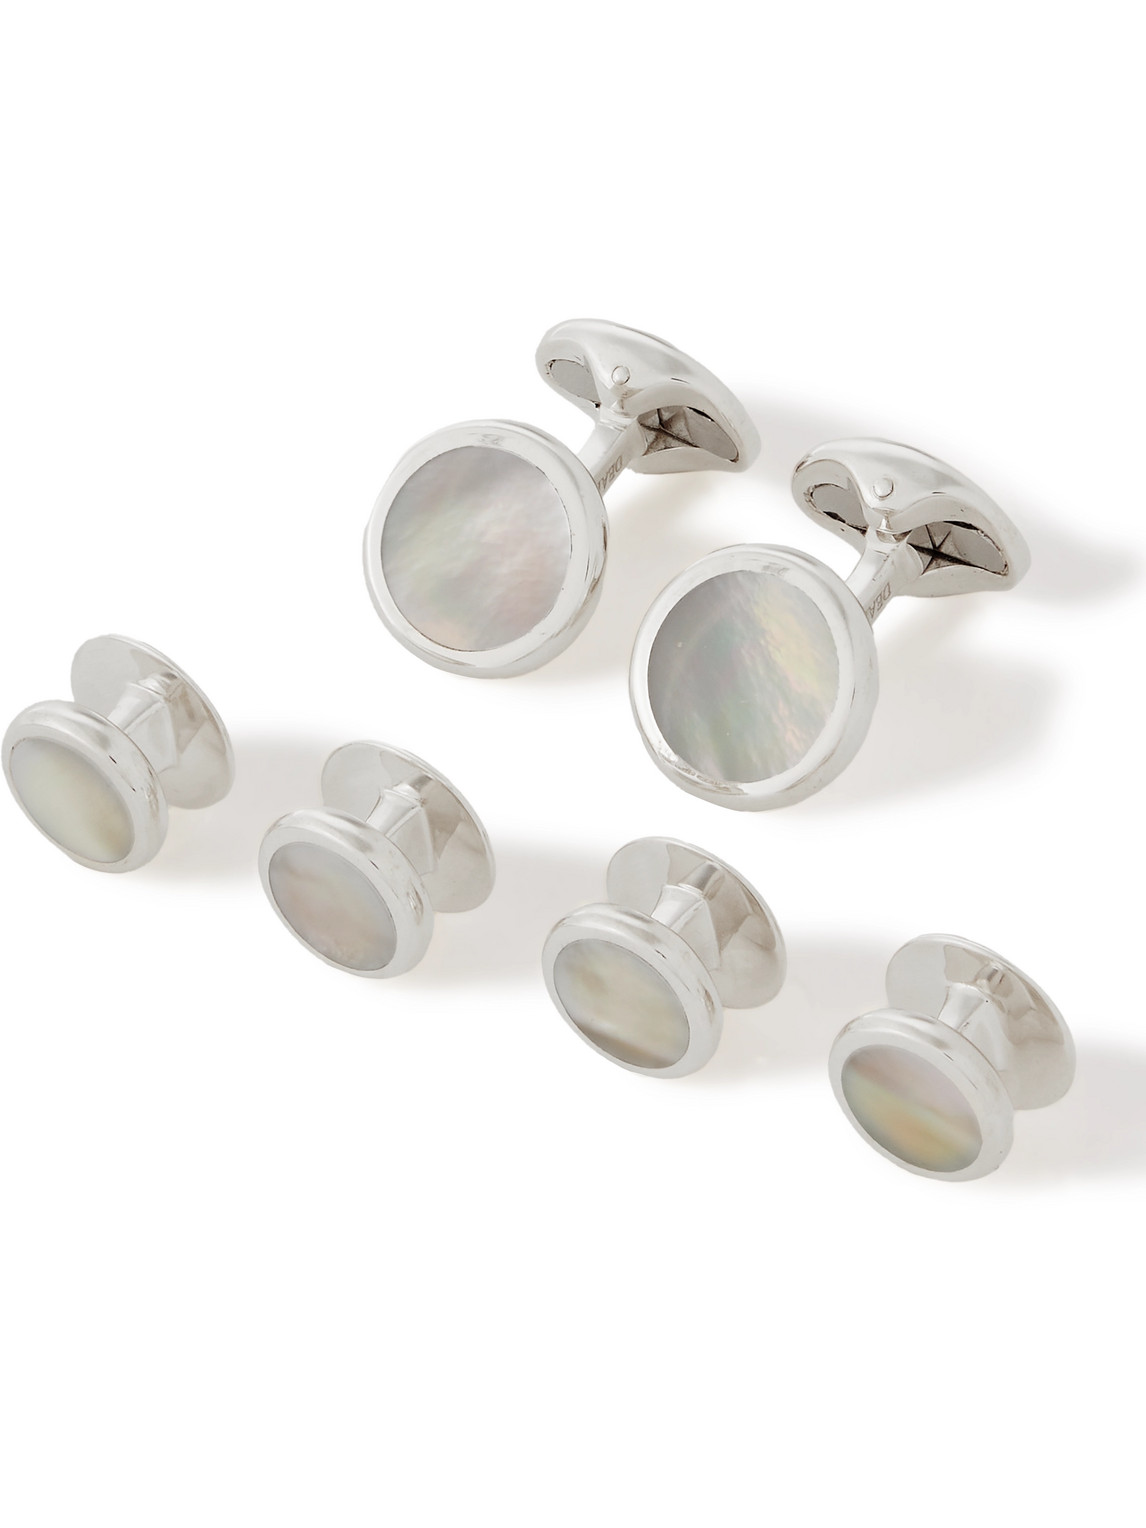 Kingsman Deakin & Francis Sterling Silver Mother-of-pearl Cufflinks And Shirt Studs Set